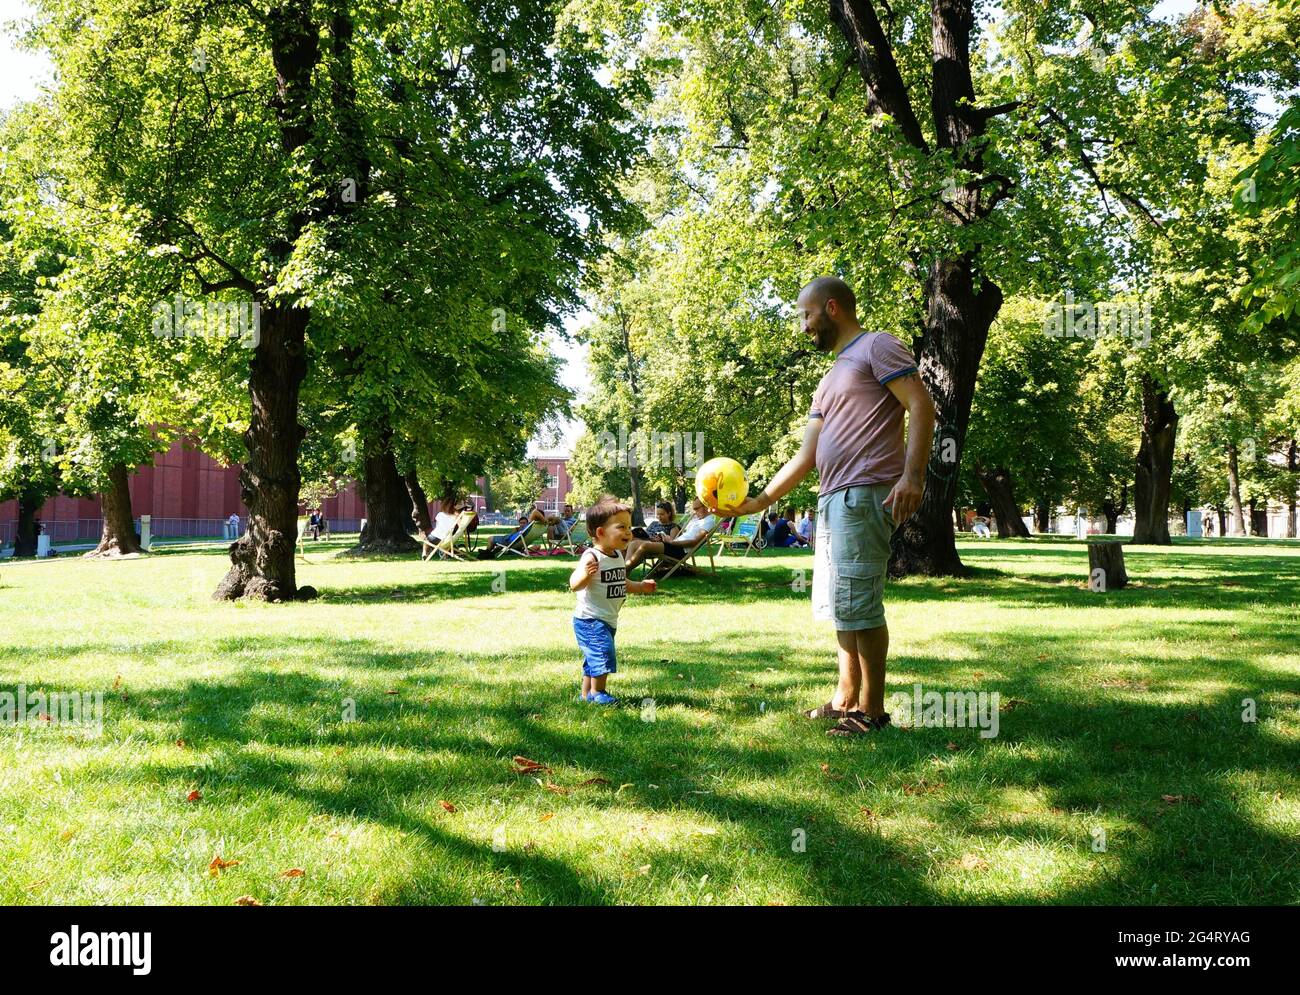 POZNAN, POLAND - Oct 20, 2015: Man and a toddler boy standing on grass at a park Stock Photo